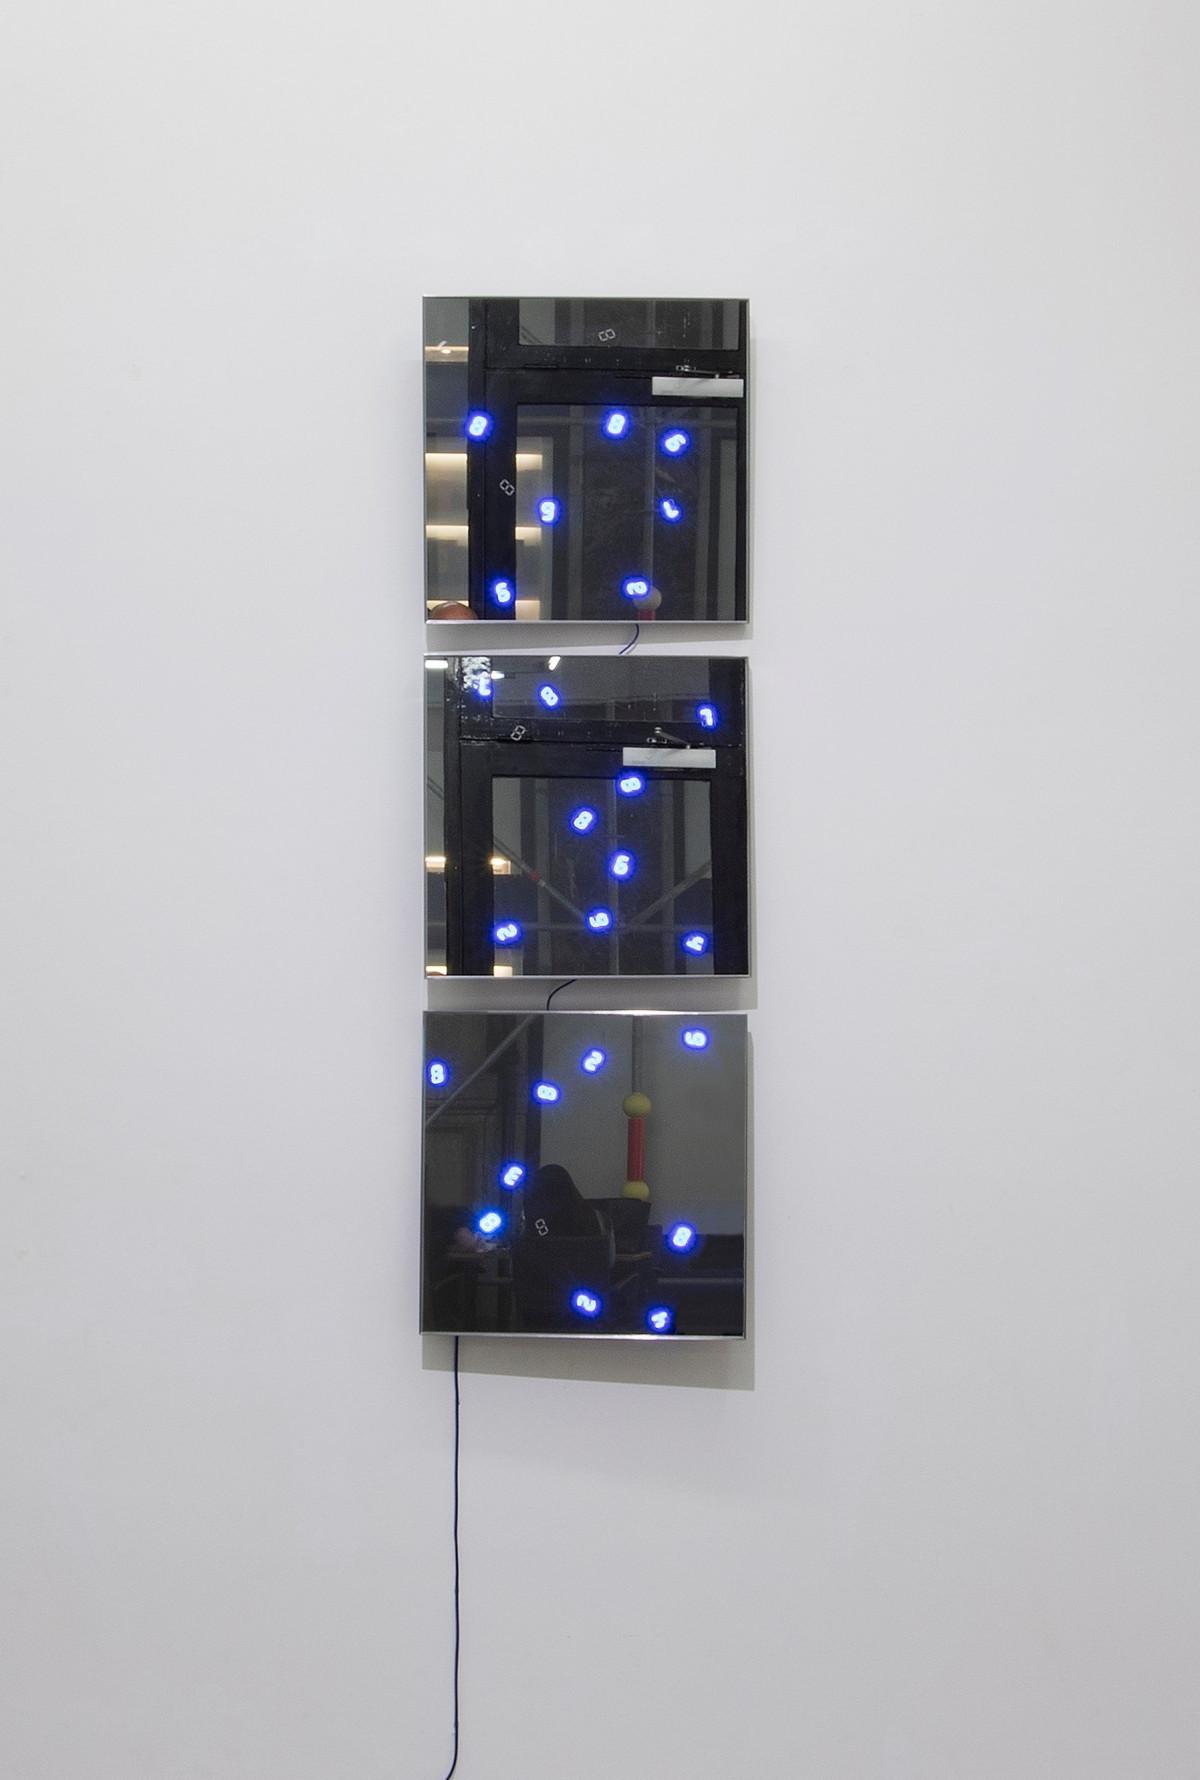 Tatsuo Miyajima, ‘C.T.C.S. Flower Dance no. 12’, 2016-2016, Light Emitting Diode, IC, electric wire, mirror glass, stainless steel frame. LED type: Time G-BL 29 pieces 